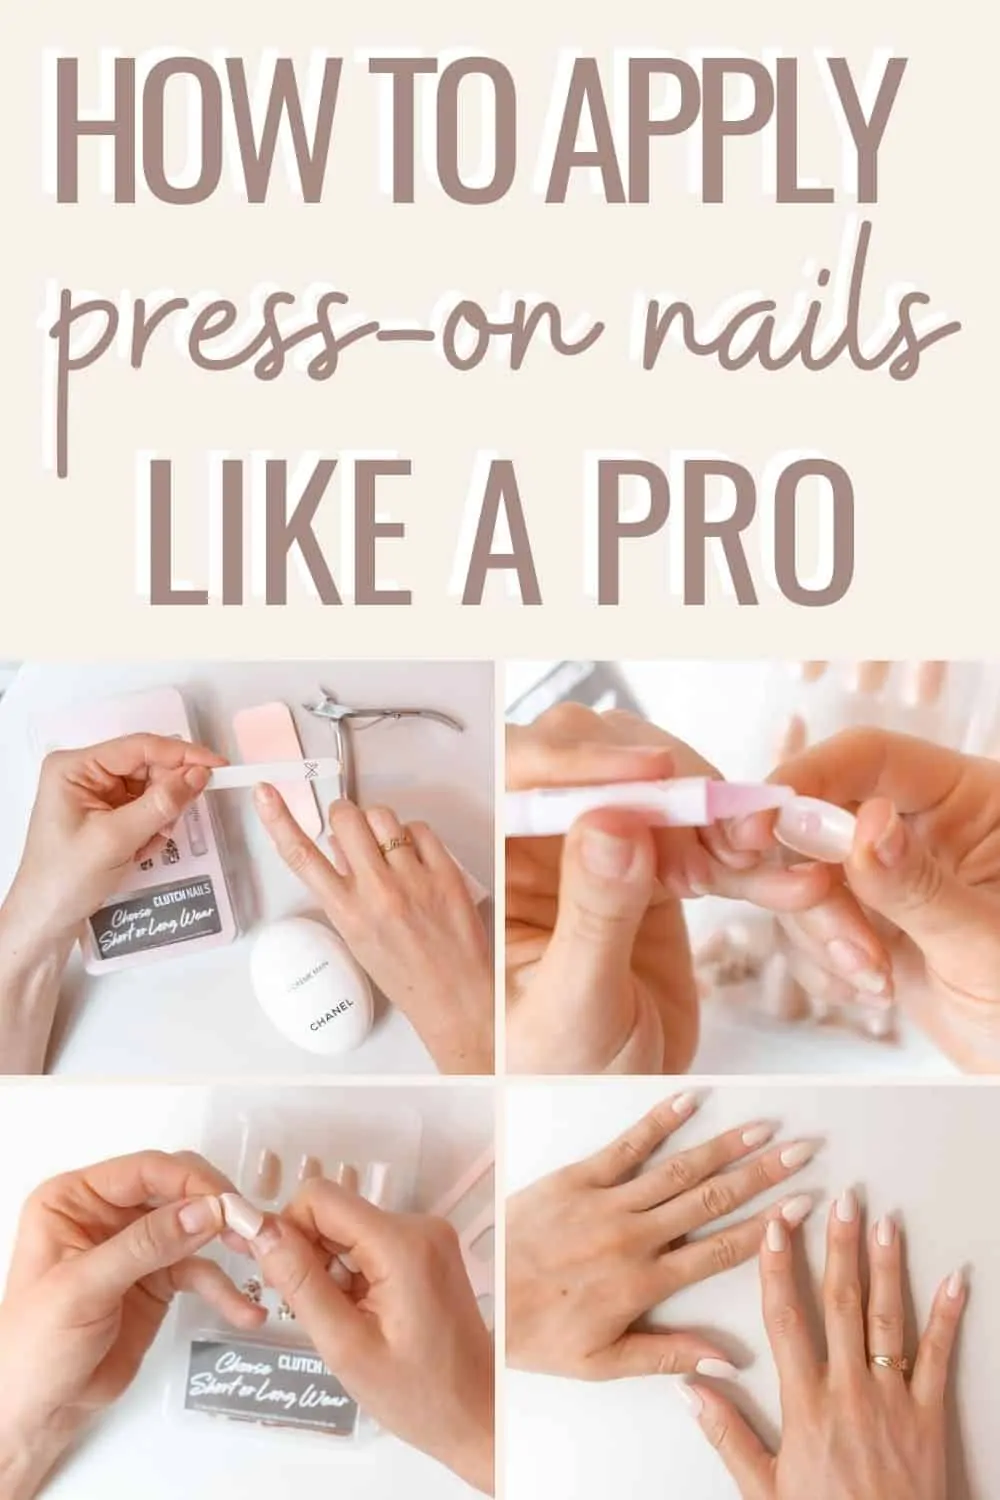 How to Apply Fake Nails: 7 Steps to Ensure Your Press-On Nails Last